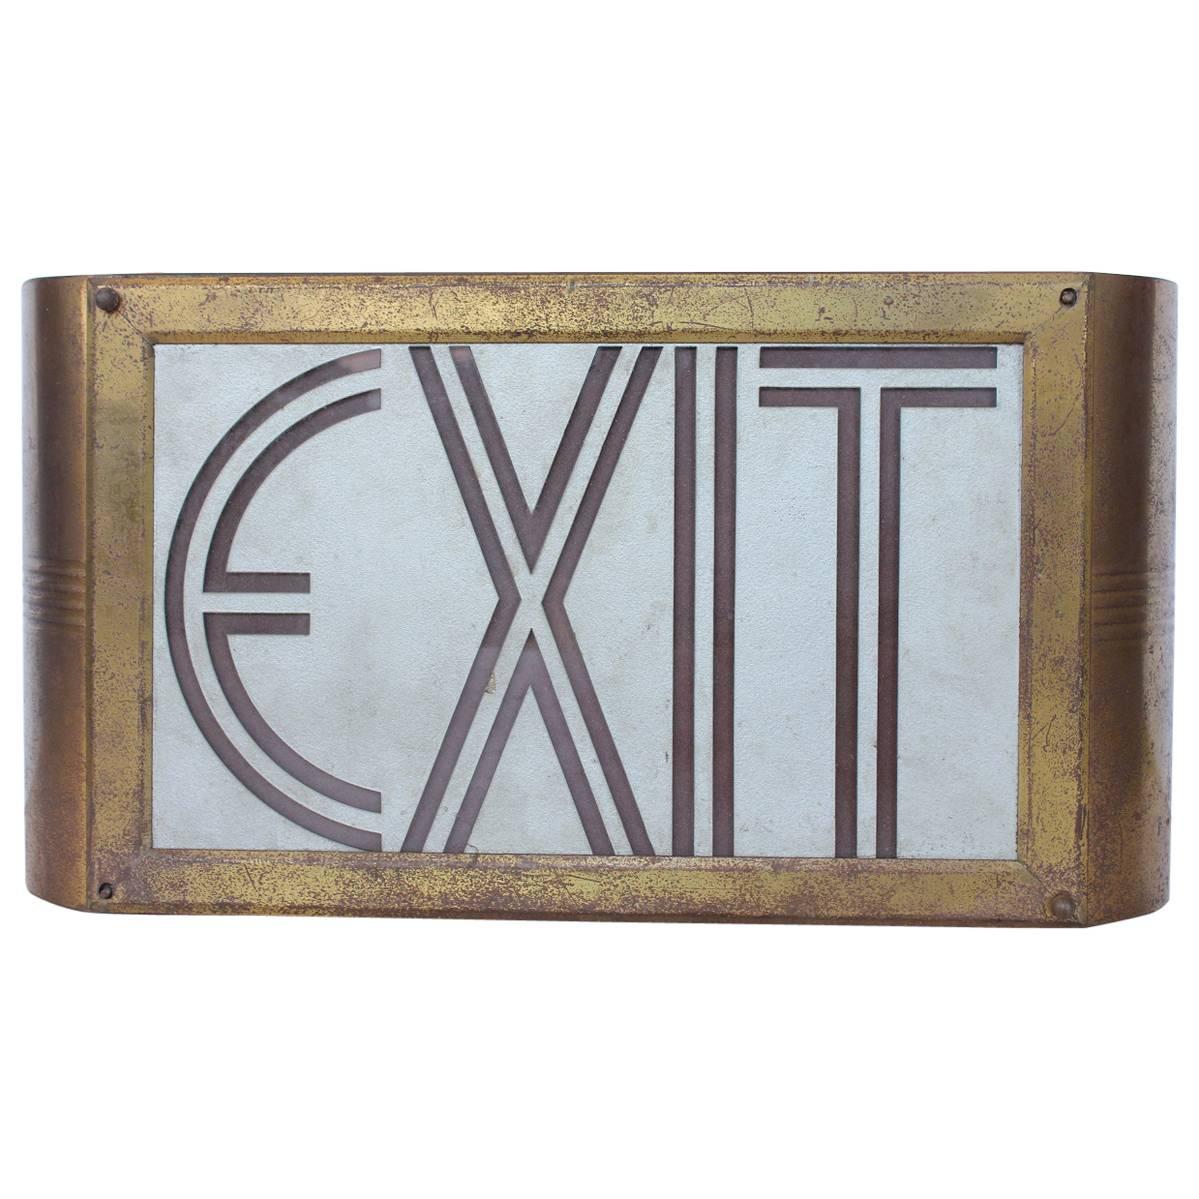 Art Deco Theater Brass and Glass Exit Light